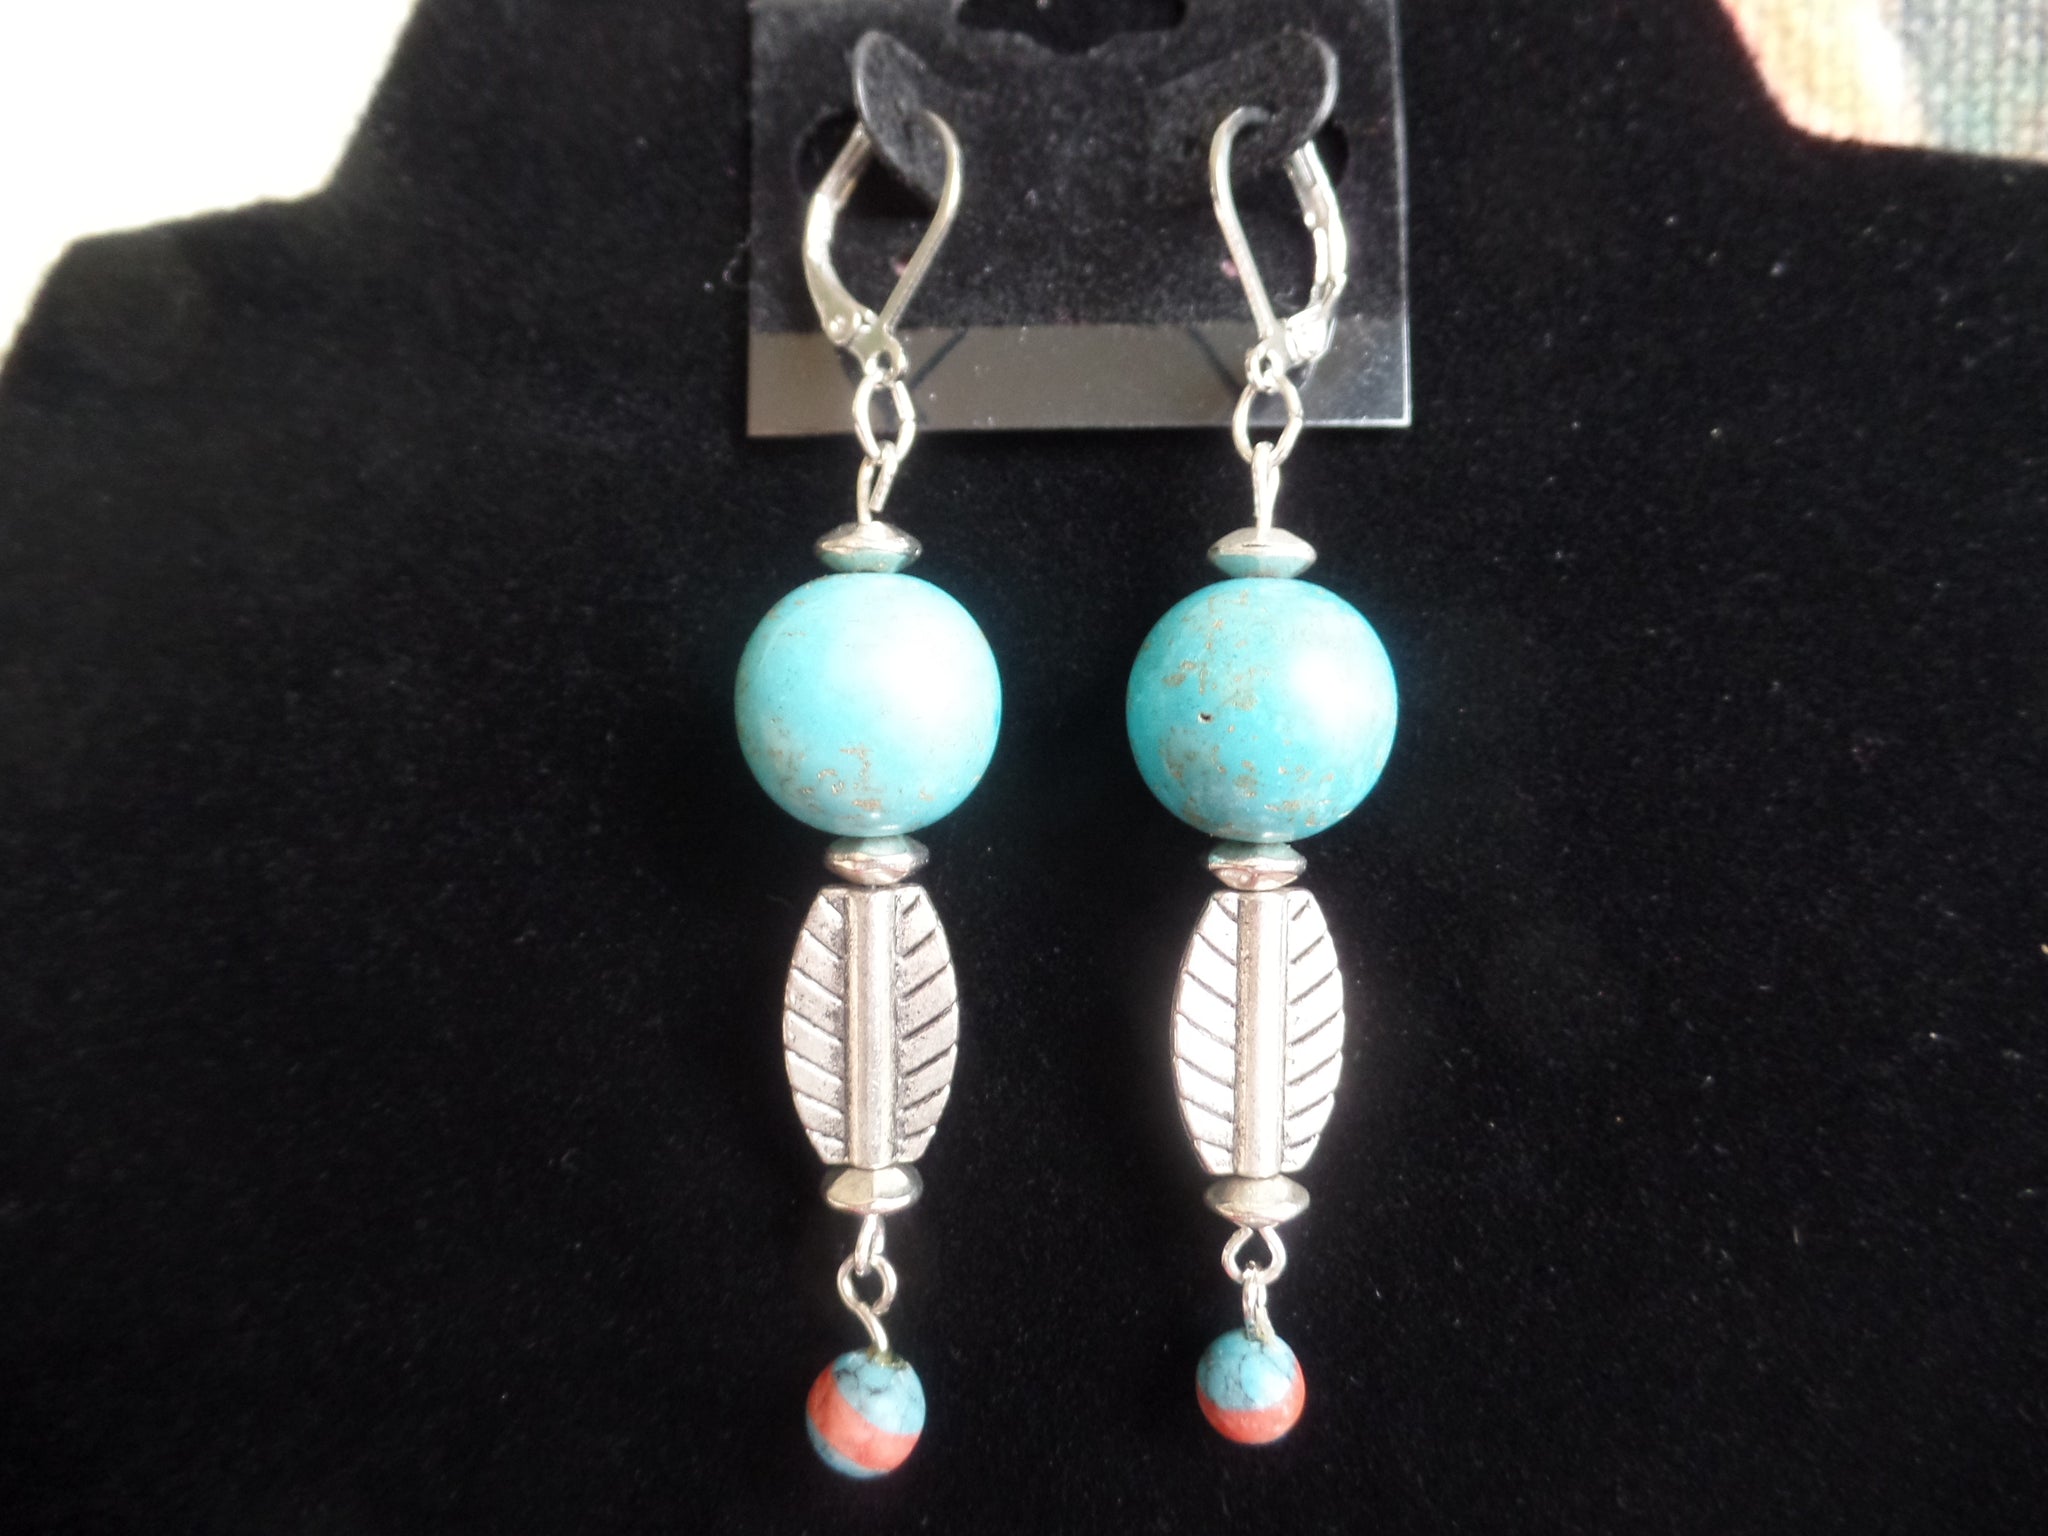 Turquoise Acrylic Rounds w/silver leaf accents on Stainless Steel Clasp.